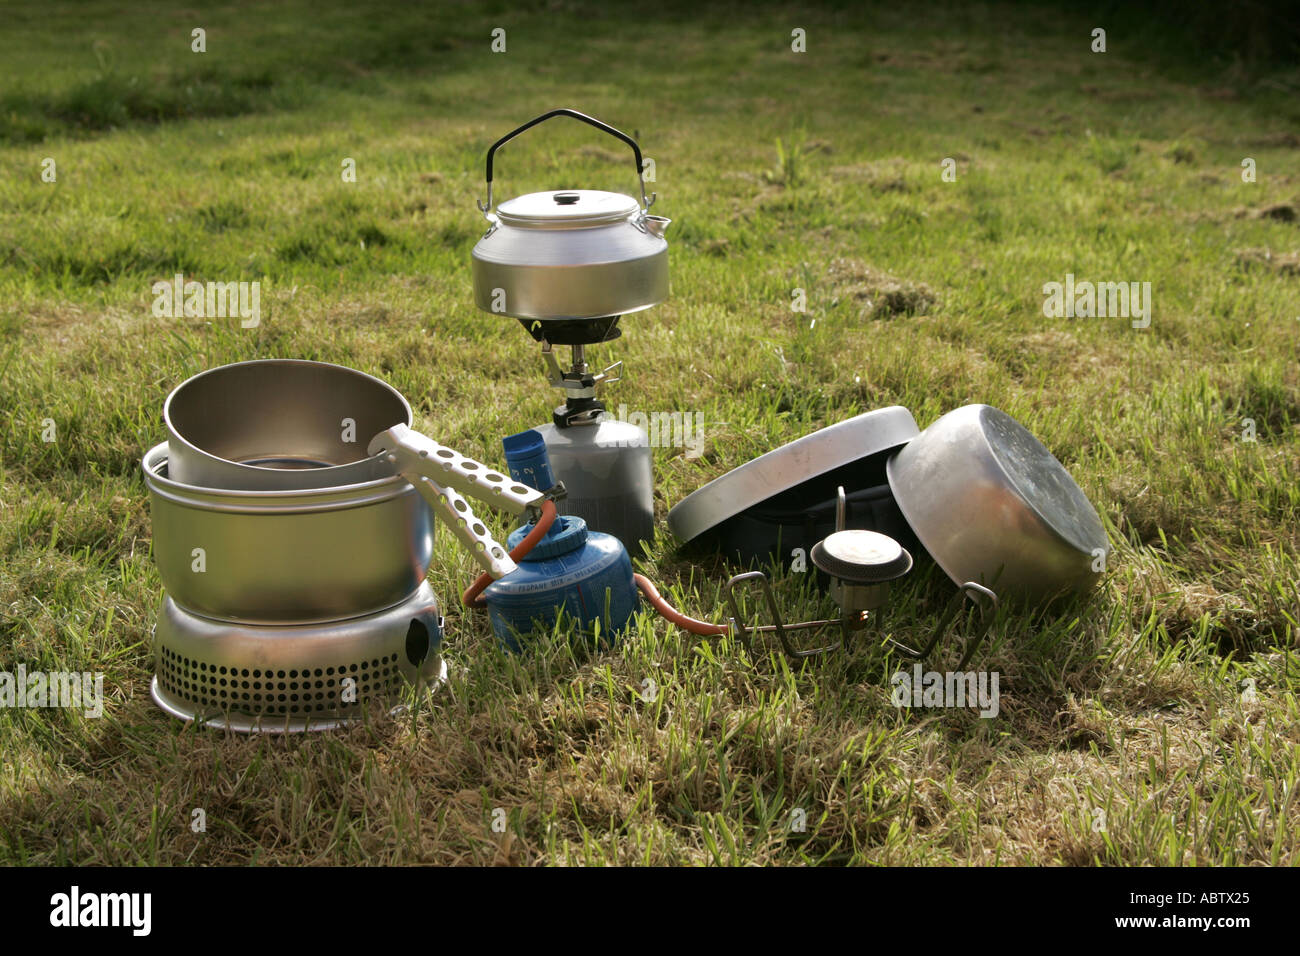 Camping Cooker Gas Stove Trangia on grass Stock Photo - Alamy